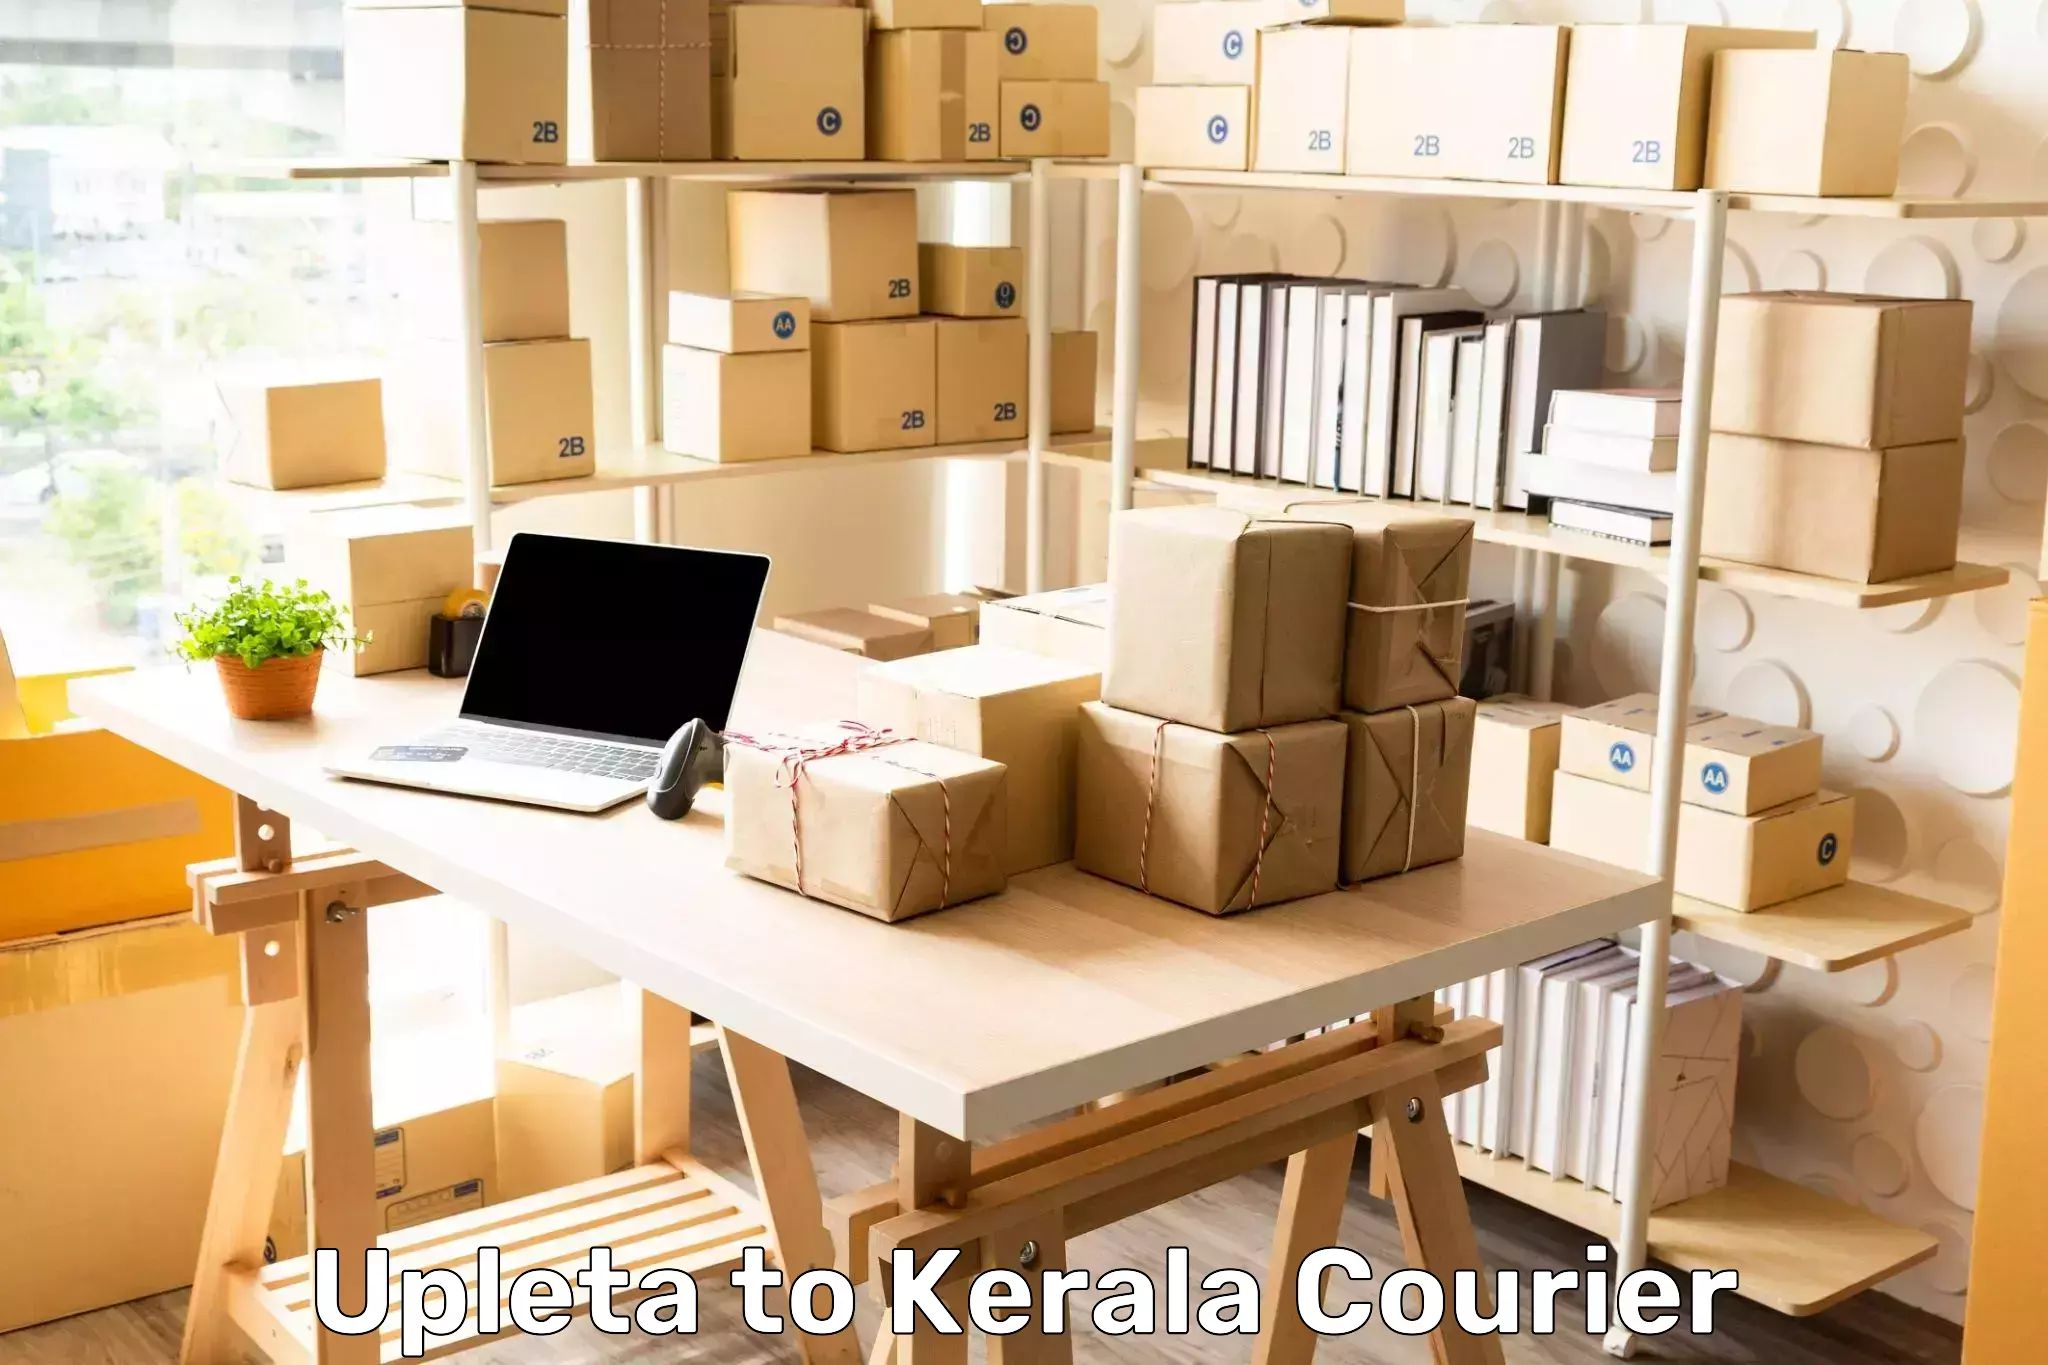 Express delivery solutions Upleta to Kerala